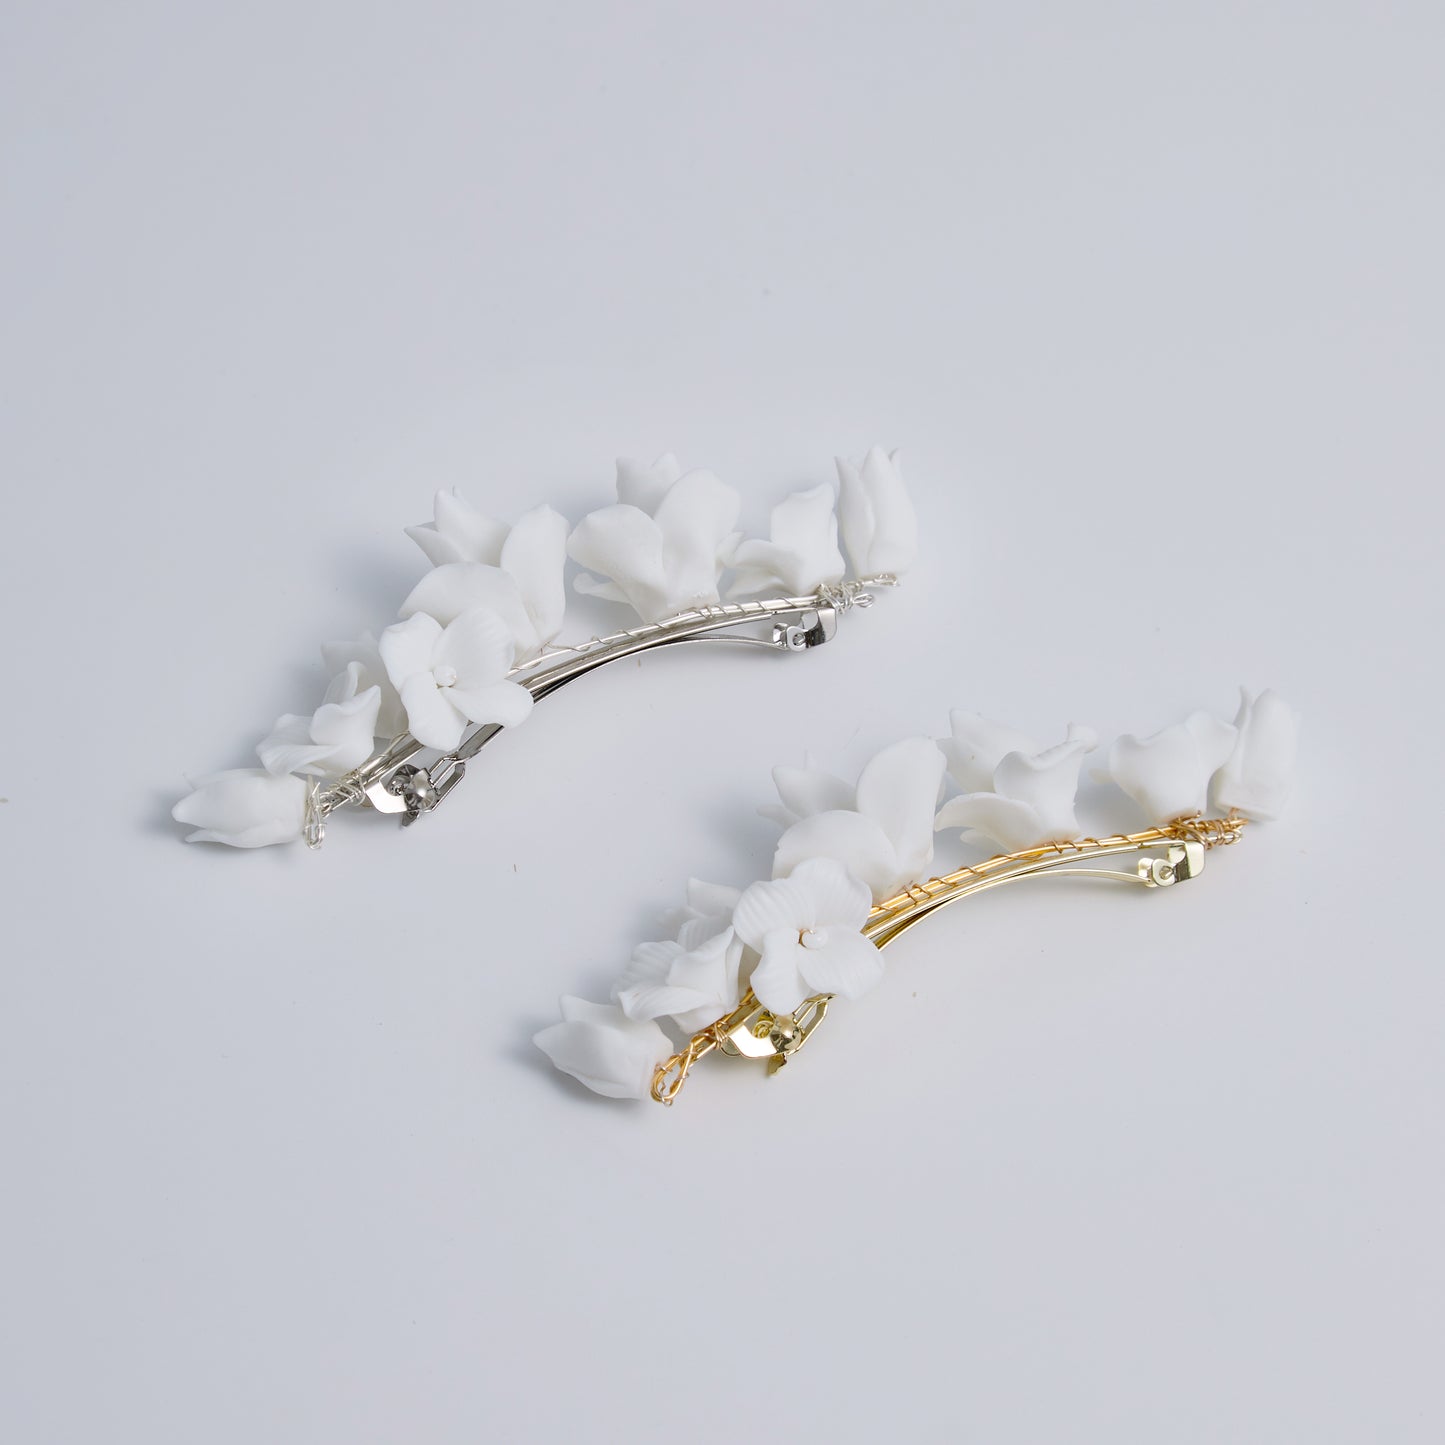 This statement bridal hair clip features carefully handcrafted white porcelain flowers and blossoms, adding an elegant and romantic touch to your hairstyle. It effortlessly enhances any bridal look, creating a timeless style.